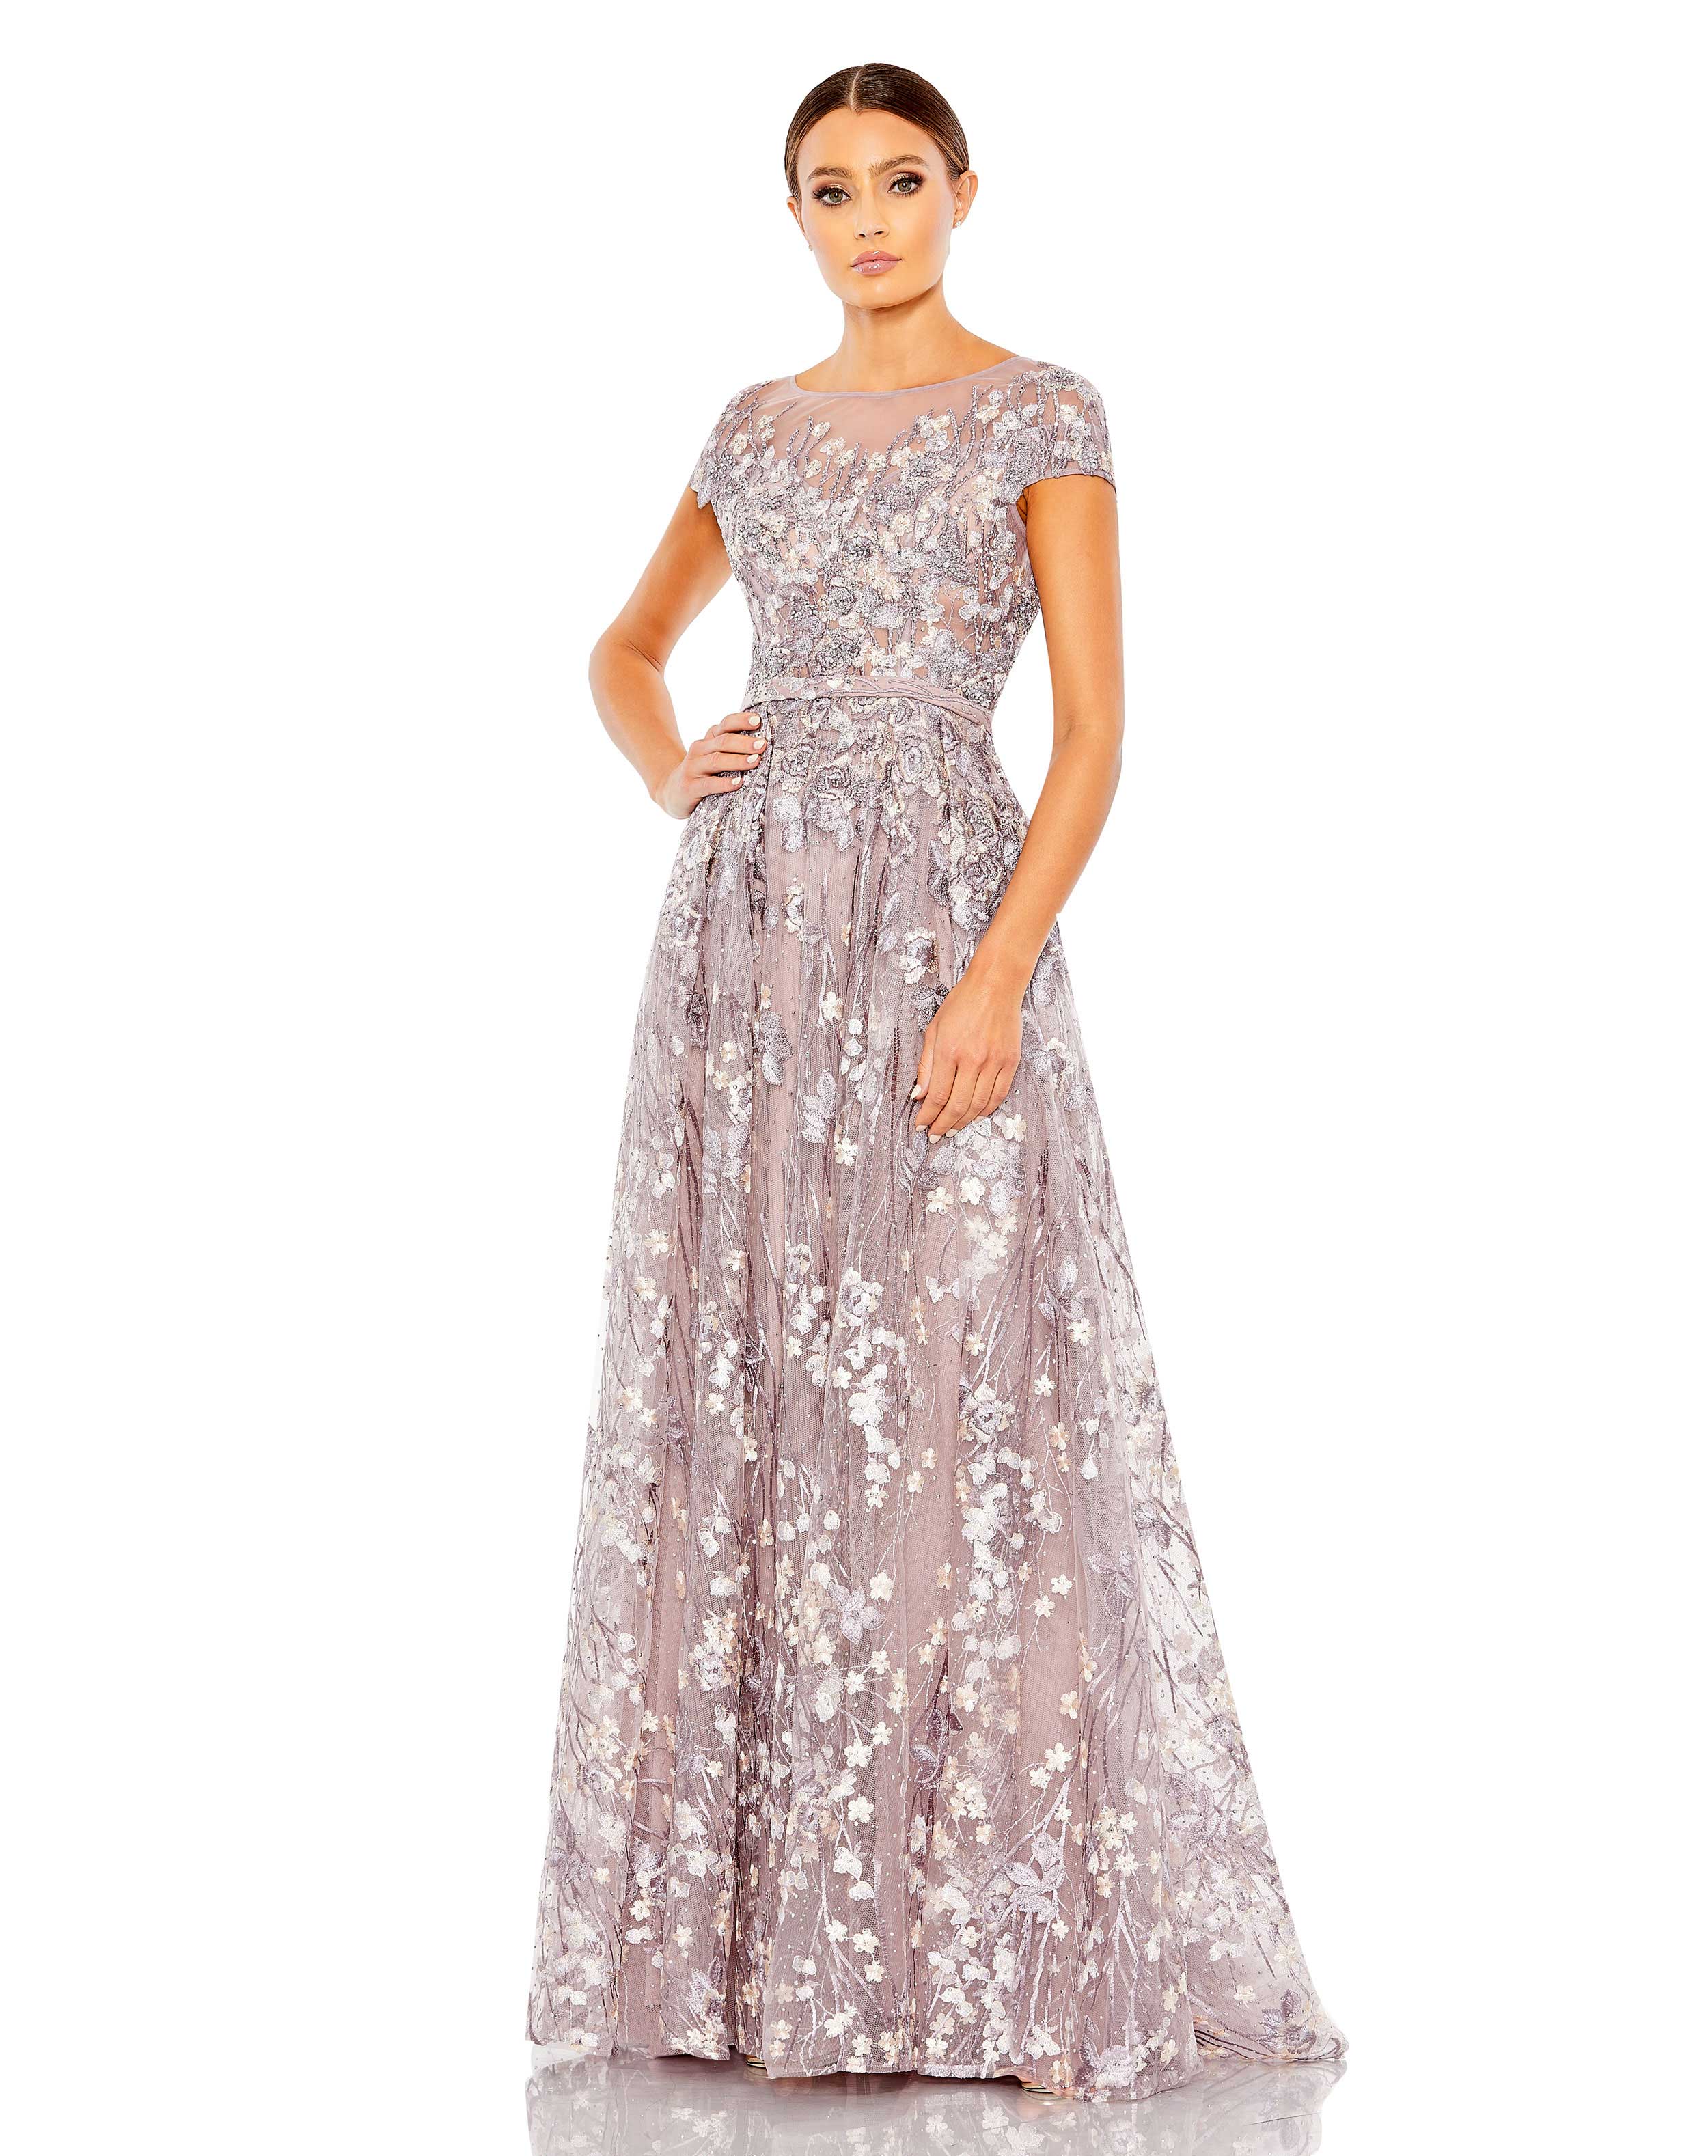 Embellished Floral Cap Sleeeve A Line Gown – Mac Duggal